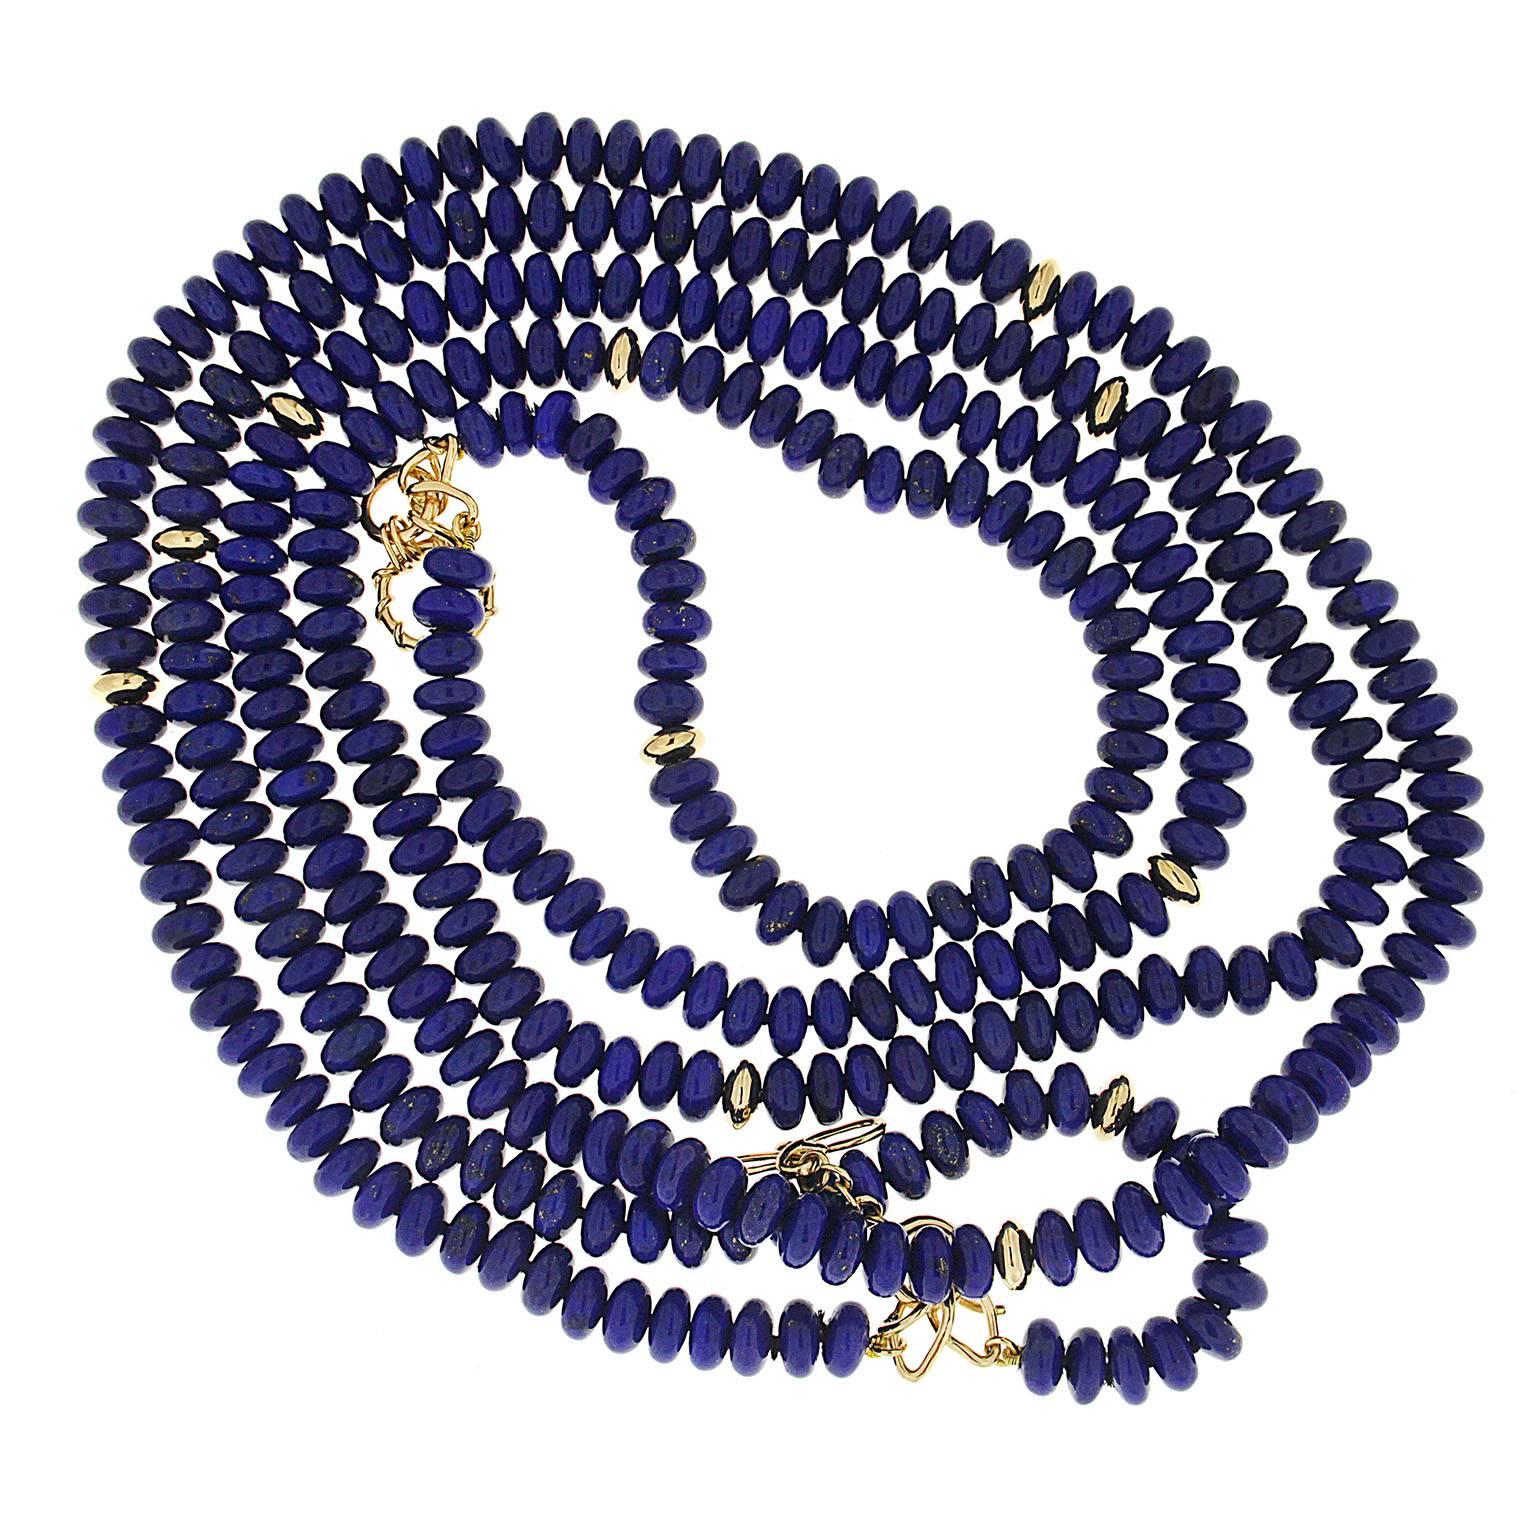 This necklace features two strands of Lapis Lazuli rondelle beads and Gold rondelles with Link toggle and wire knot clasps in 18kt yellow gold. 